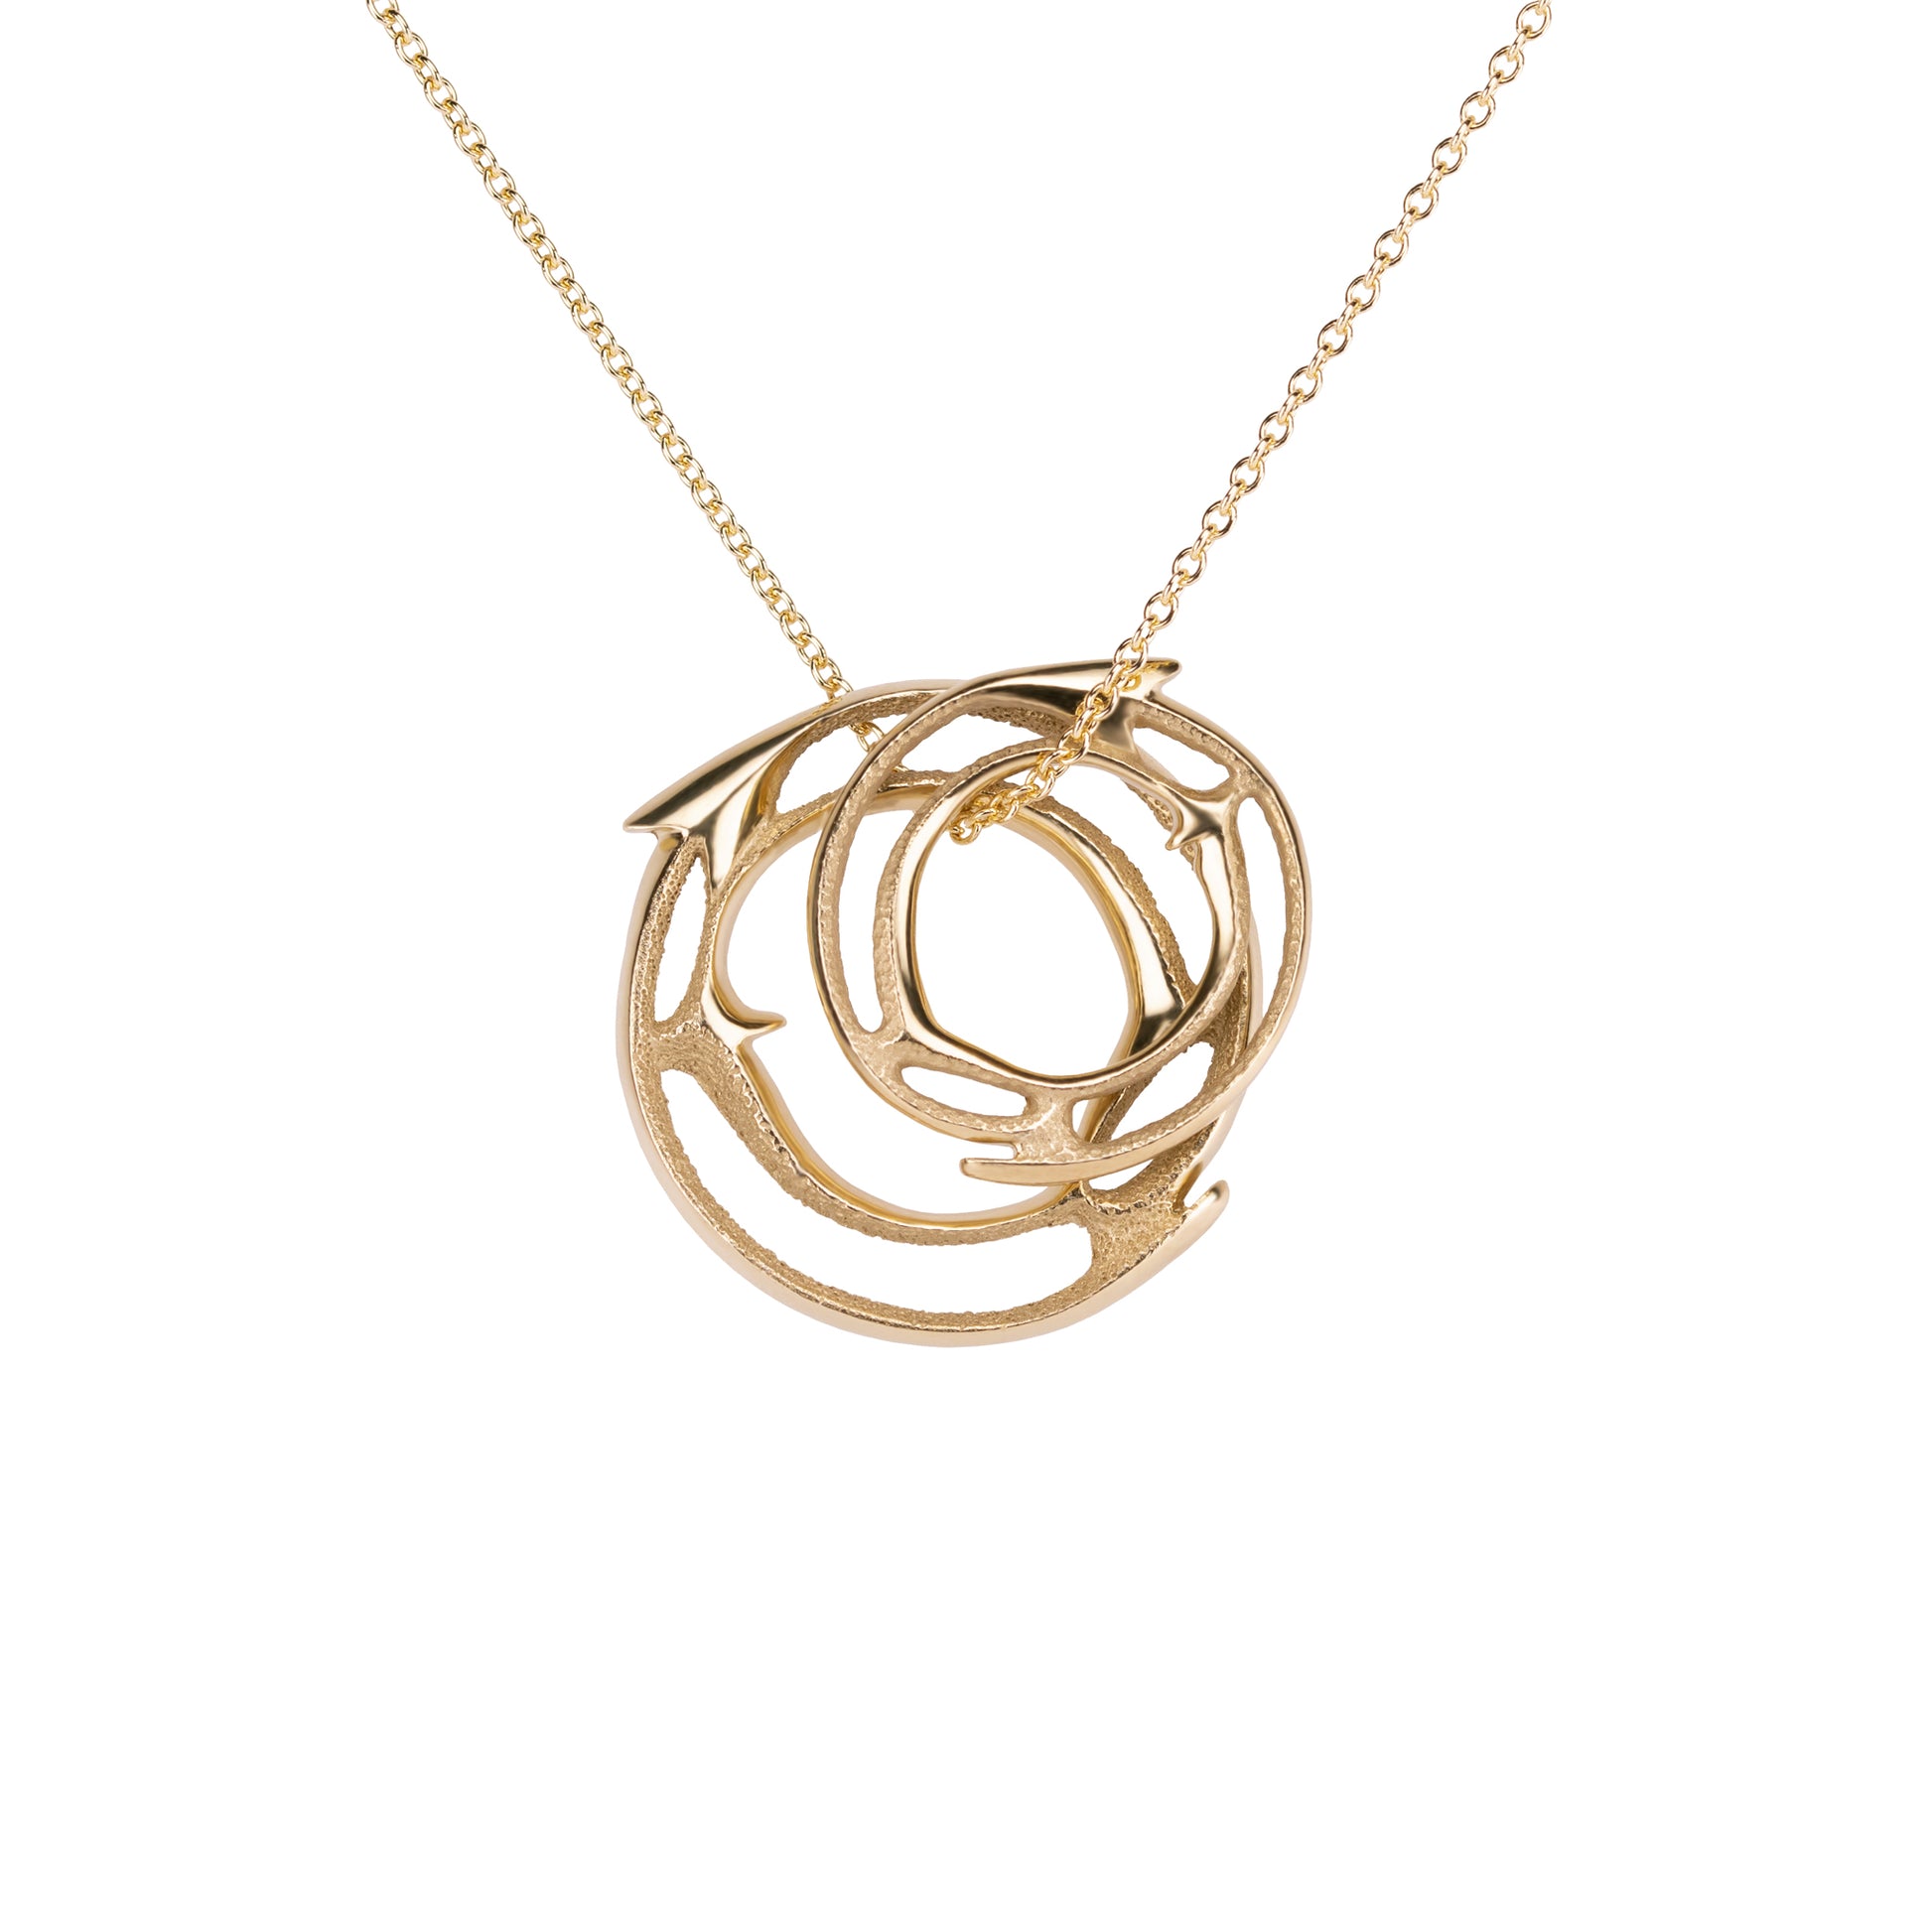 Orme-Brown_Contemporary_fine_jewellery_Halo__Slider_Pendant_Small_Medium_18ct_gold_recycled_Fairmined_ethical_sustainable